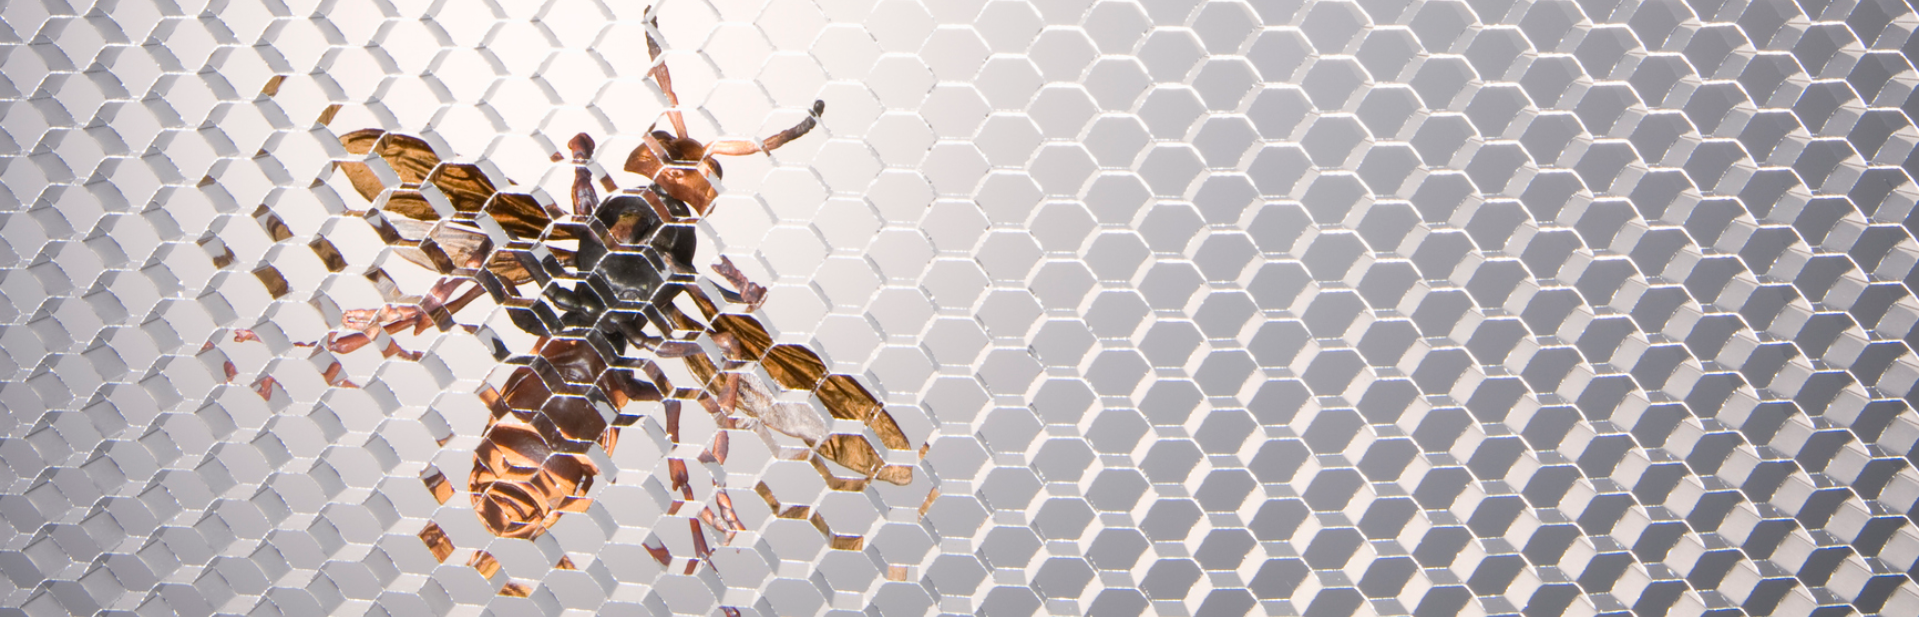 image of a bee on a clear glass hive pattern